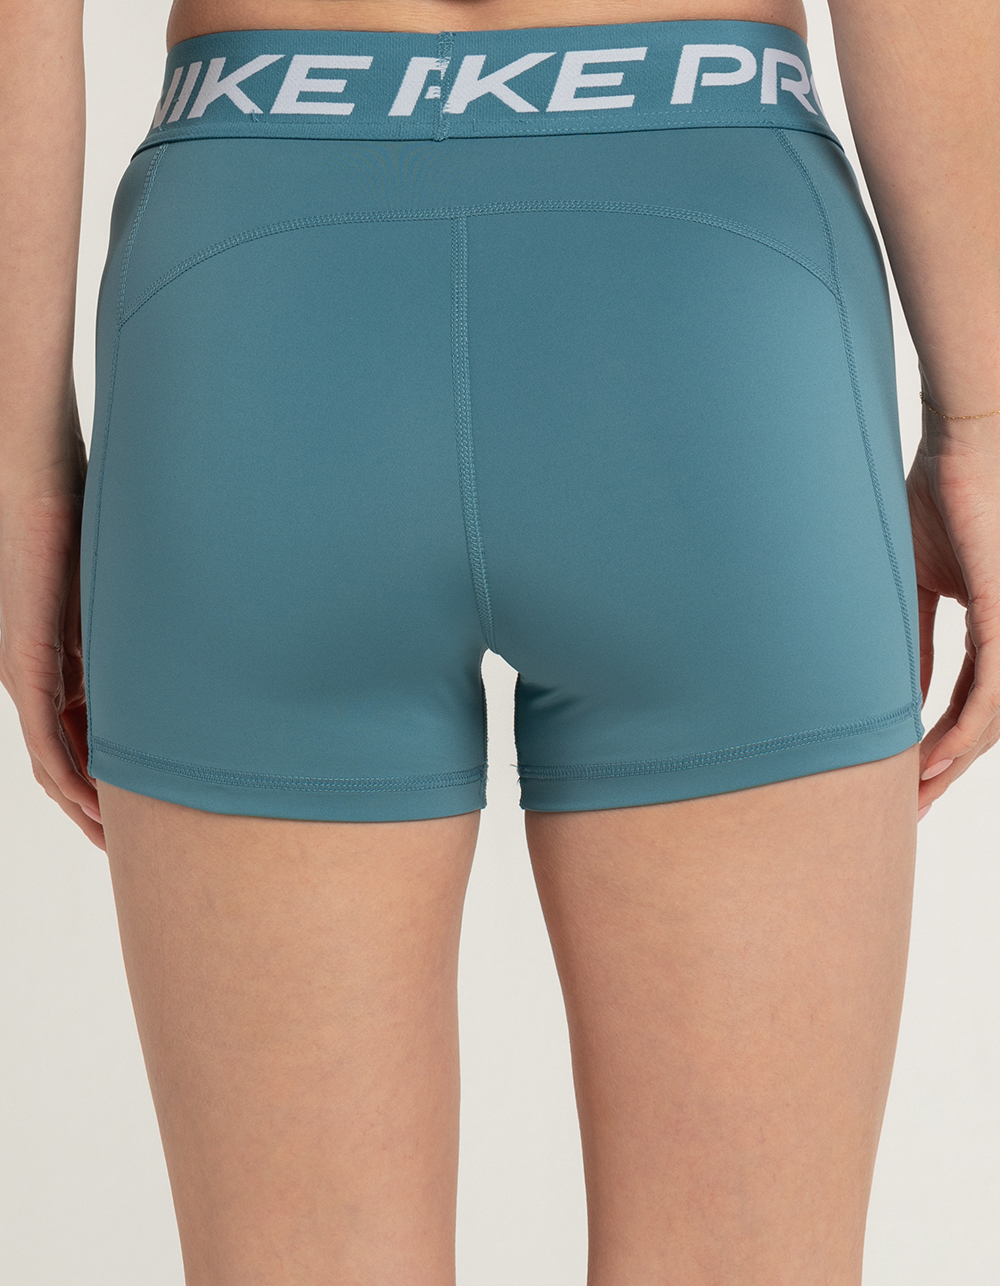 NIKE Pro 365 Womens Compression Shorts  MIDNIGHT BLUE  Tillys